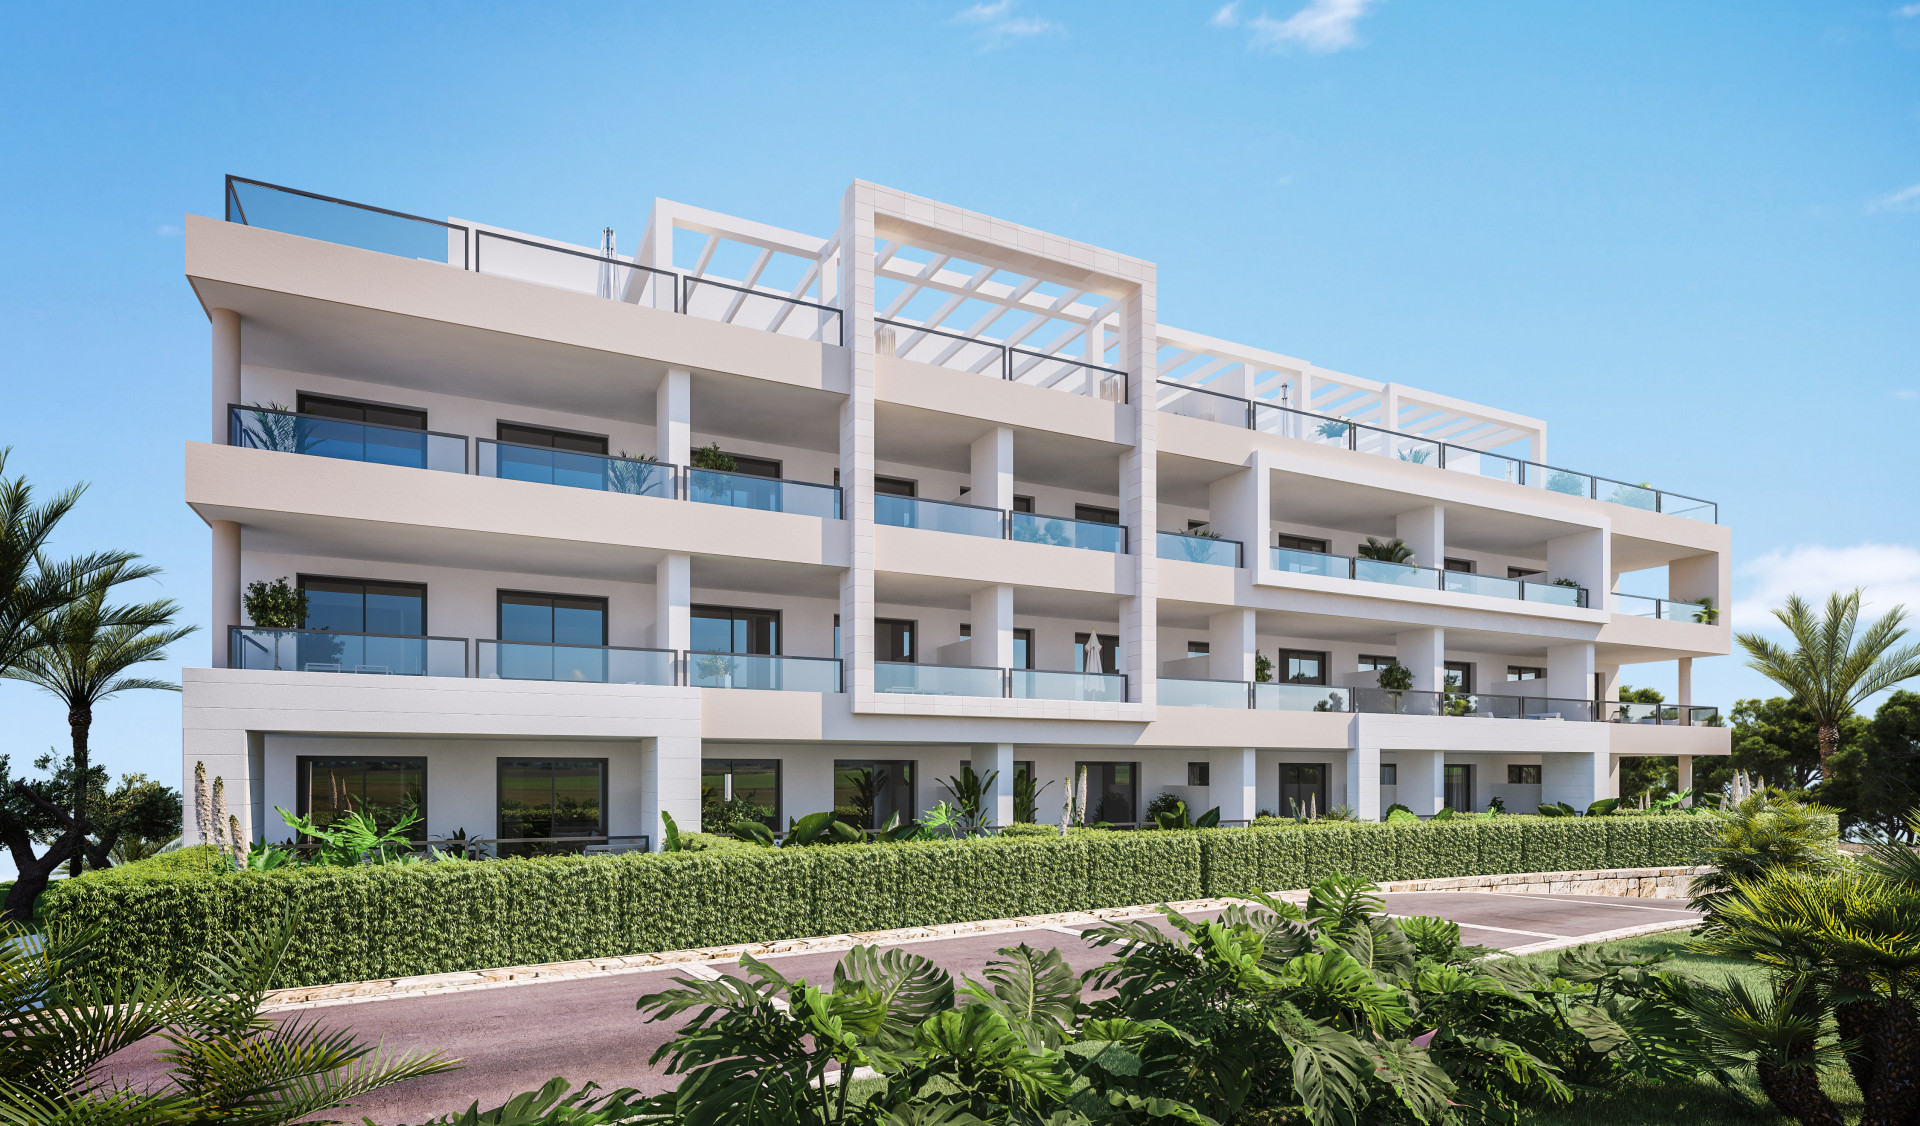 New modern front line golf apartments and penthouses for sale in Calanova - Mijas Costa